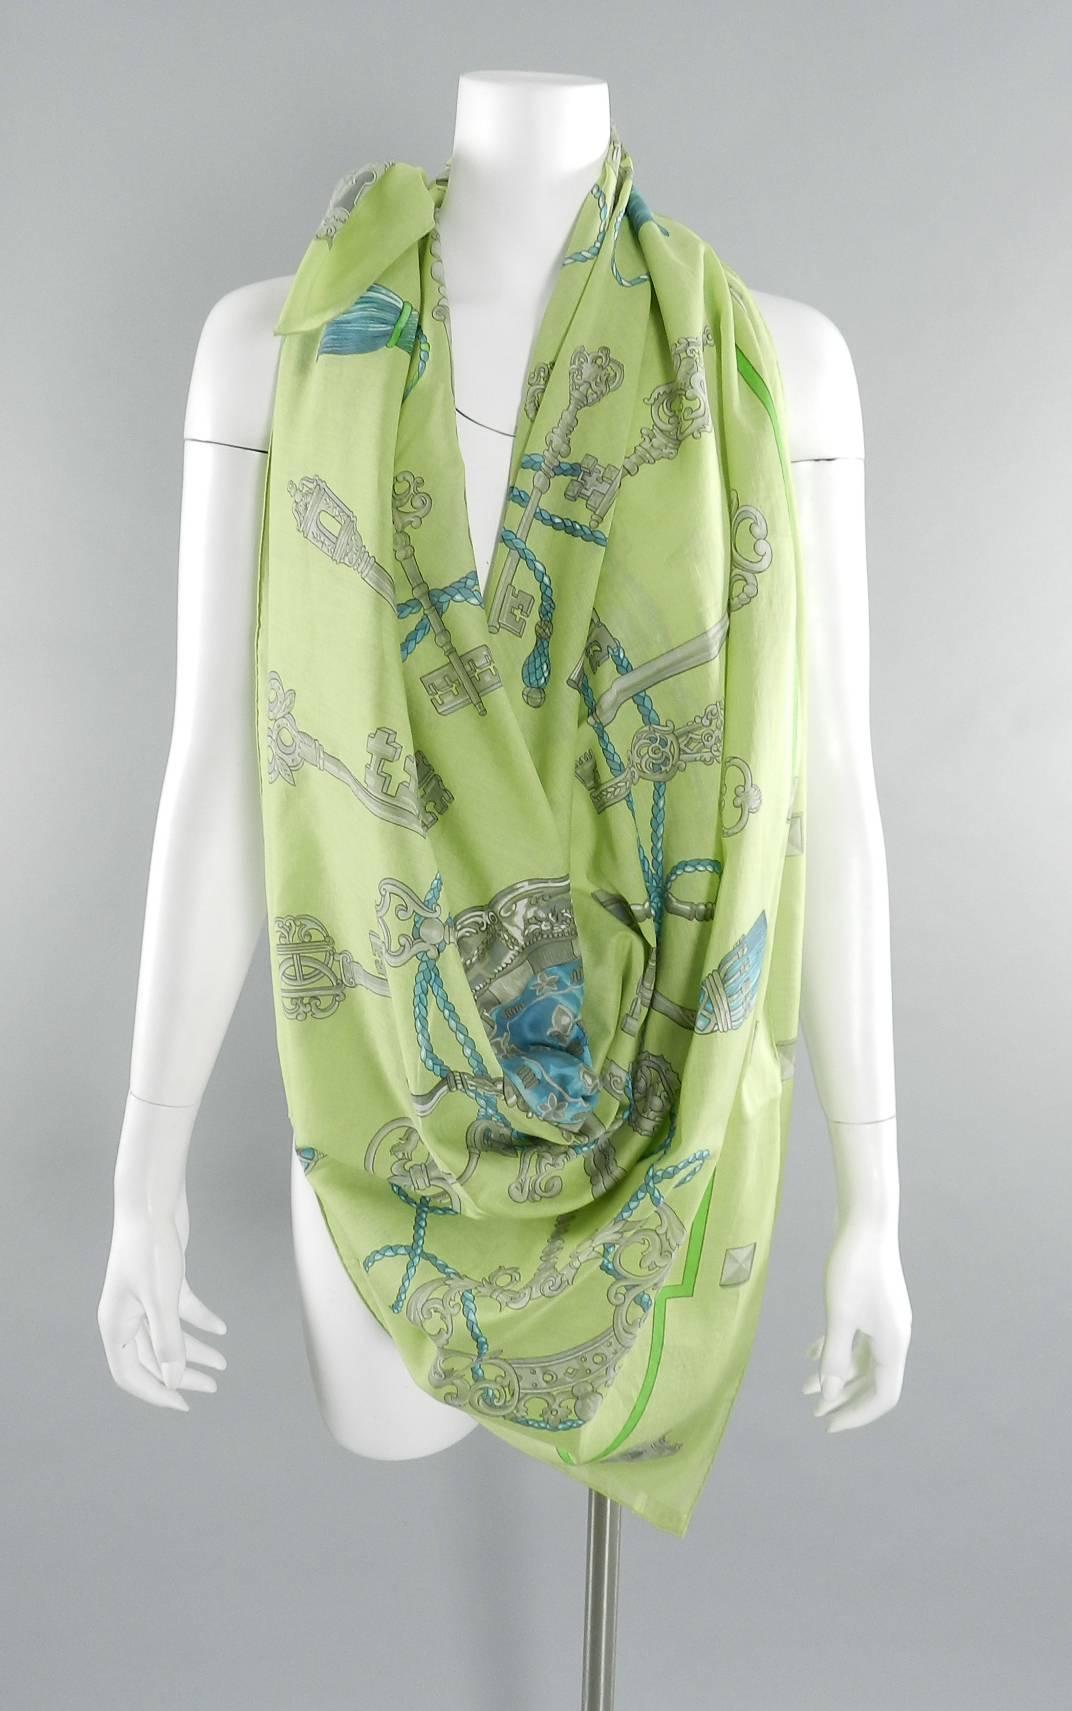 HERMES Lime Green Light Cotton 140 cm Pareo / Shawl / Wrap.  Design is  